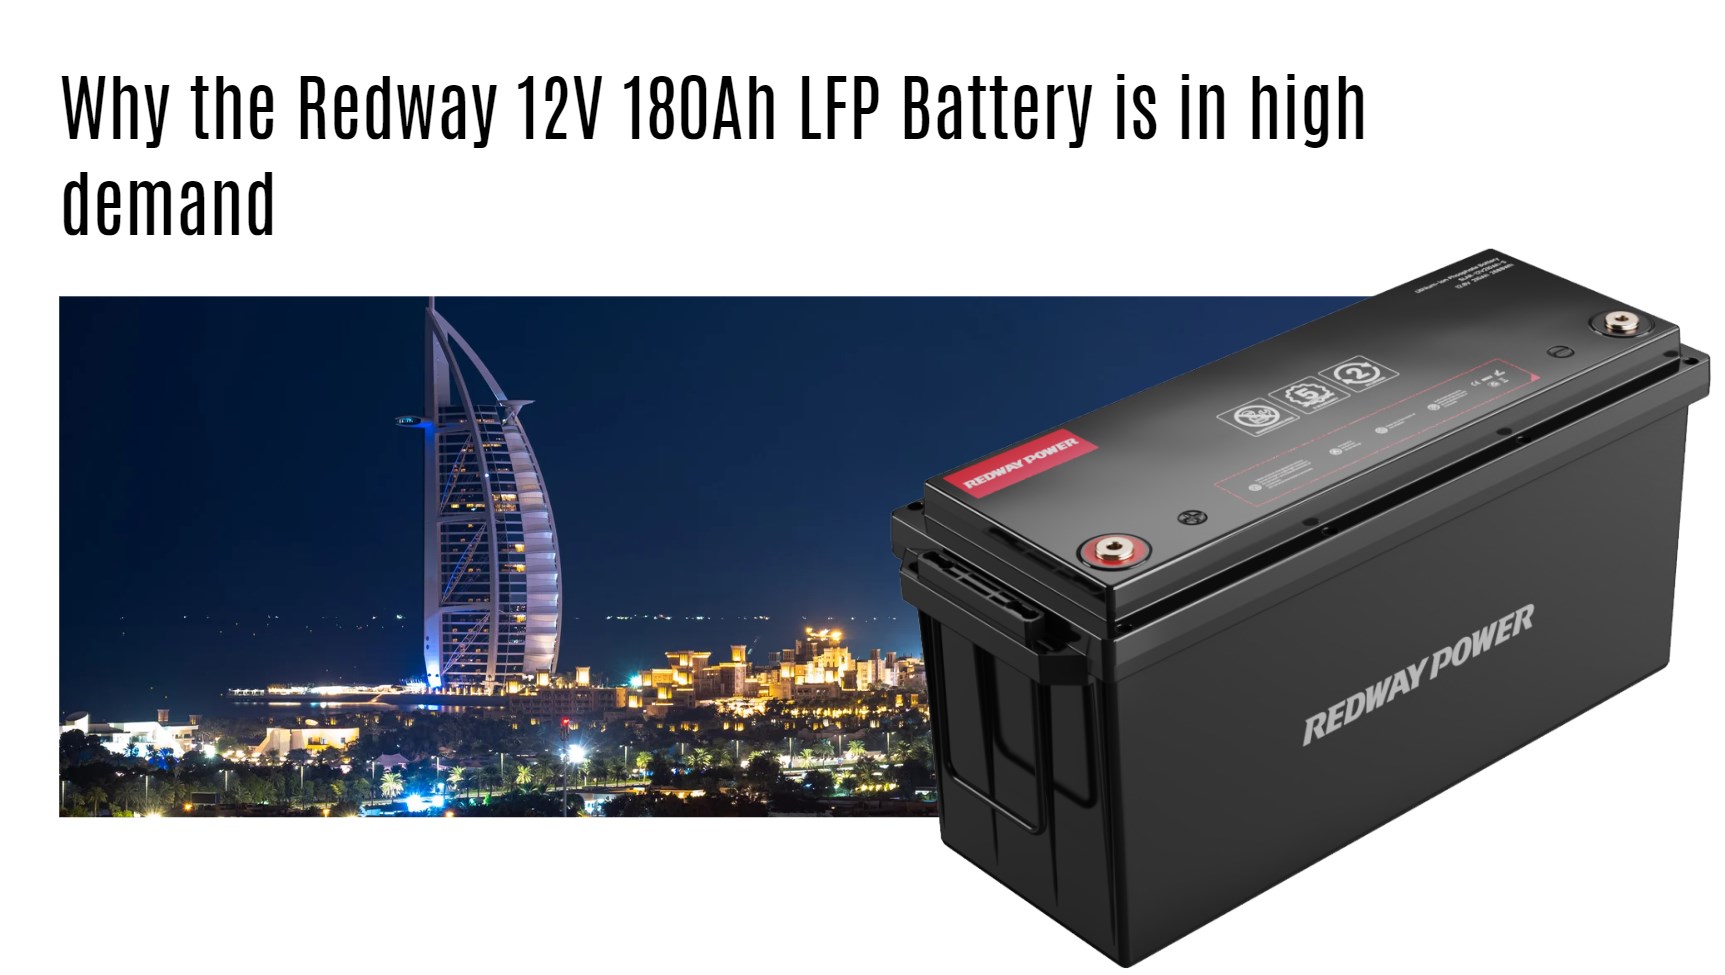 Why the Redway 12V 180Ah LFP Battery is in high demand